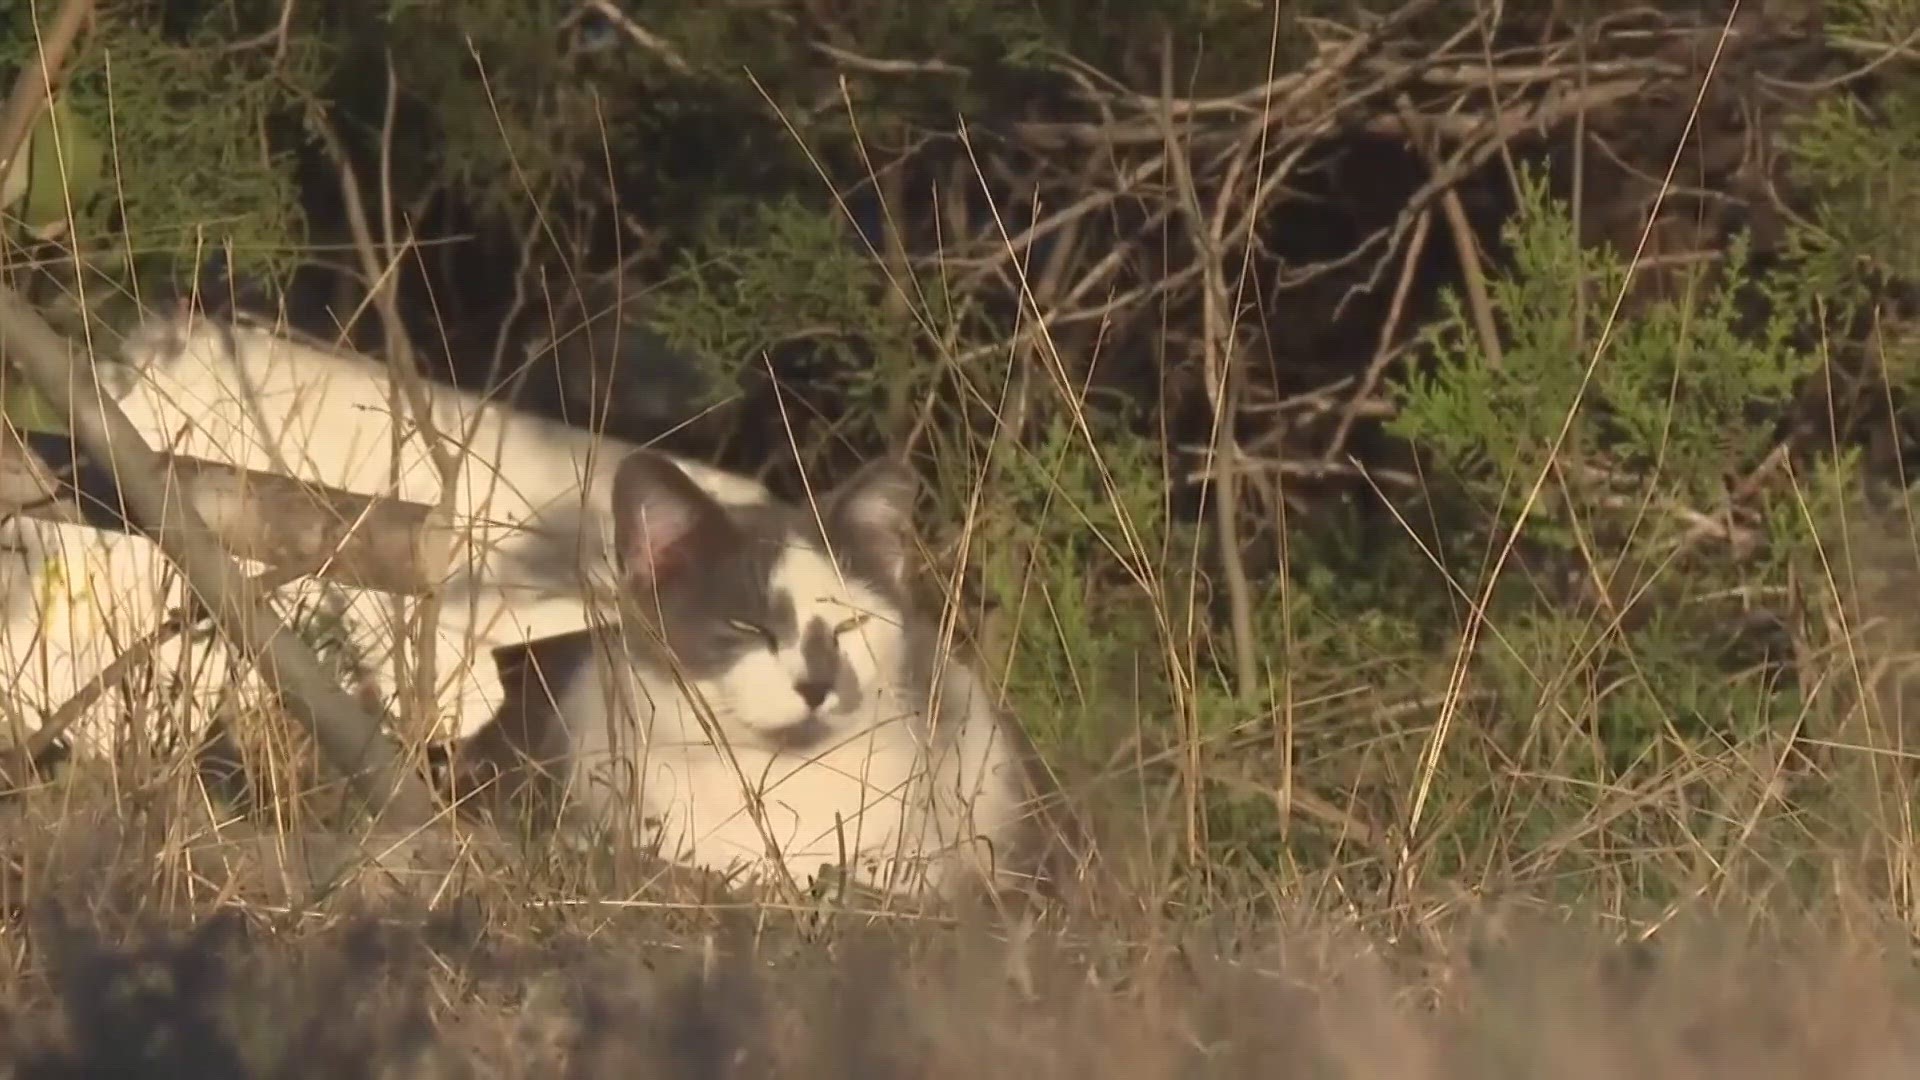 The City Council is discussing changes on how they take action on feral cat colonies, and some residents are unhappy.